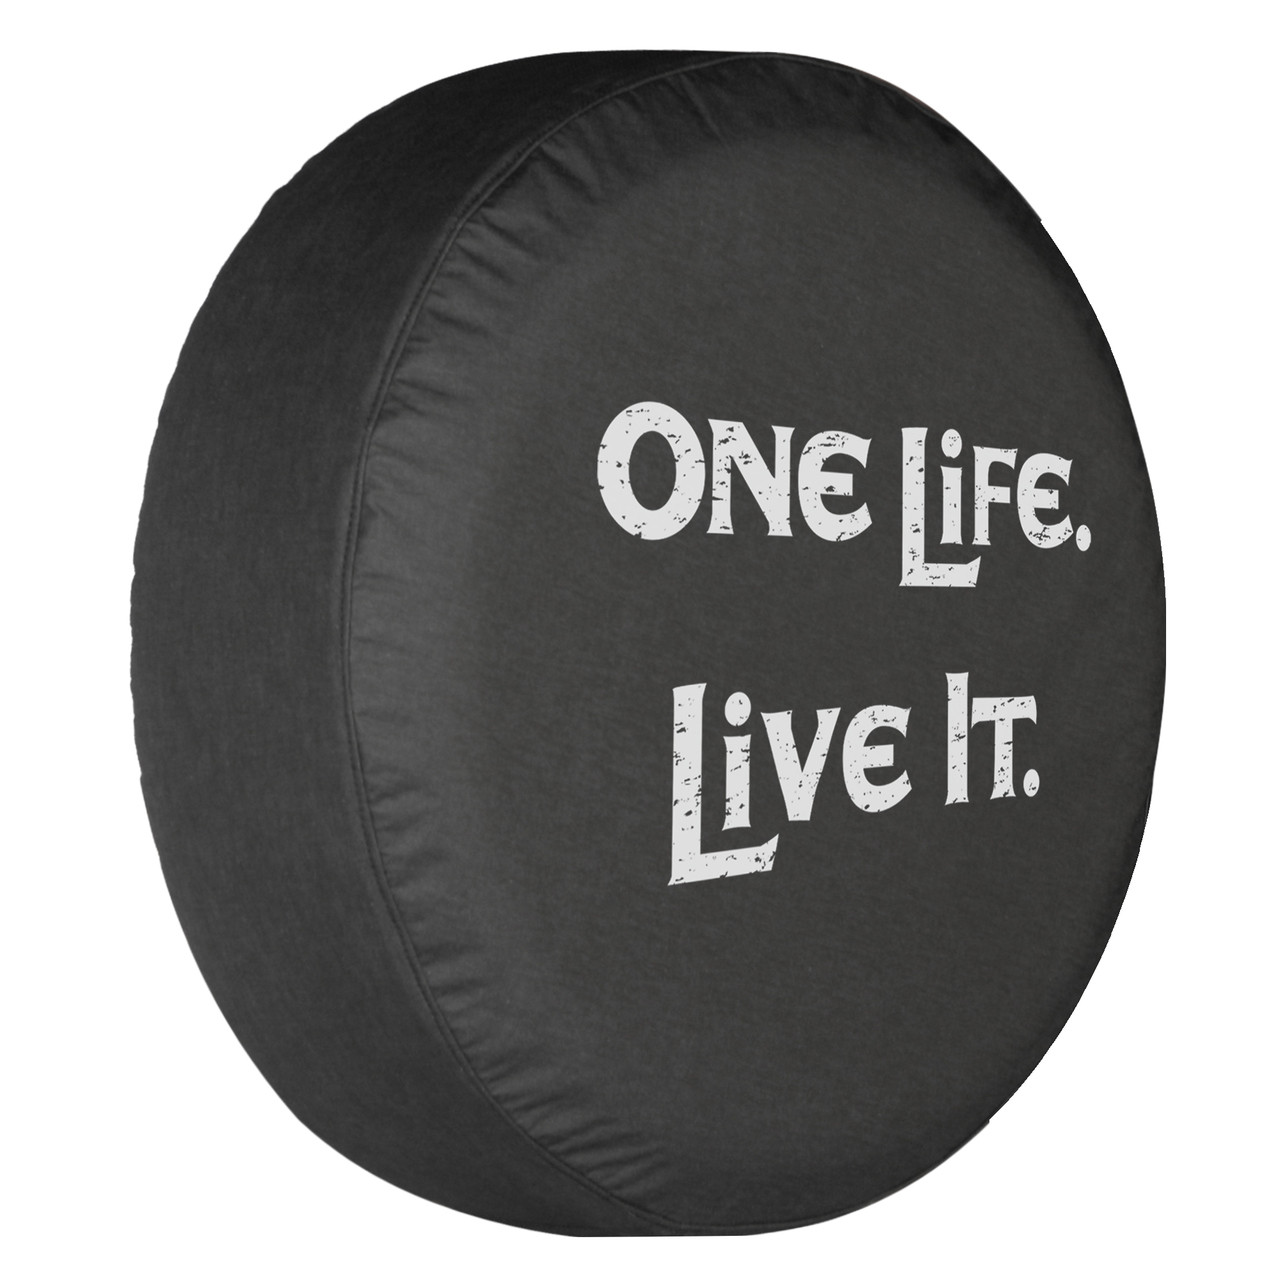 Wildlife Series Grizzly Bear Tire Covers by Boomerang - Many Sizes to Custom Fit Your Vehicle One Life Live It Jeep Tire Cover